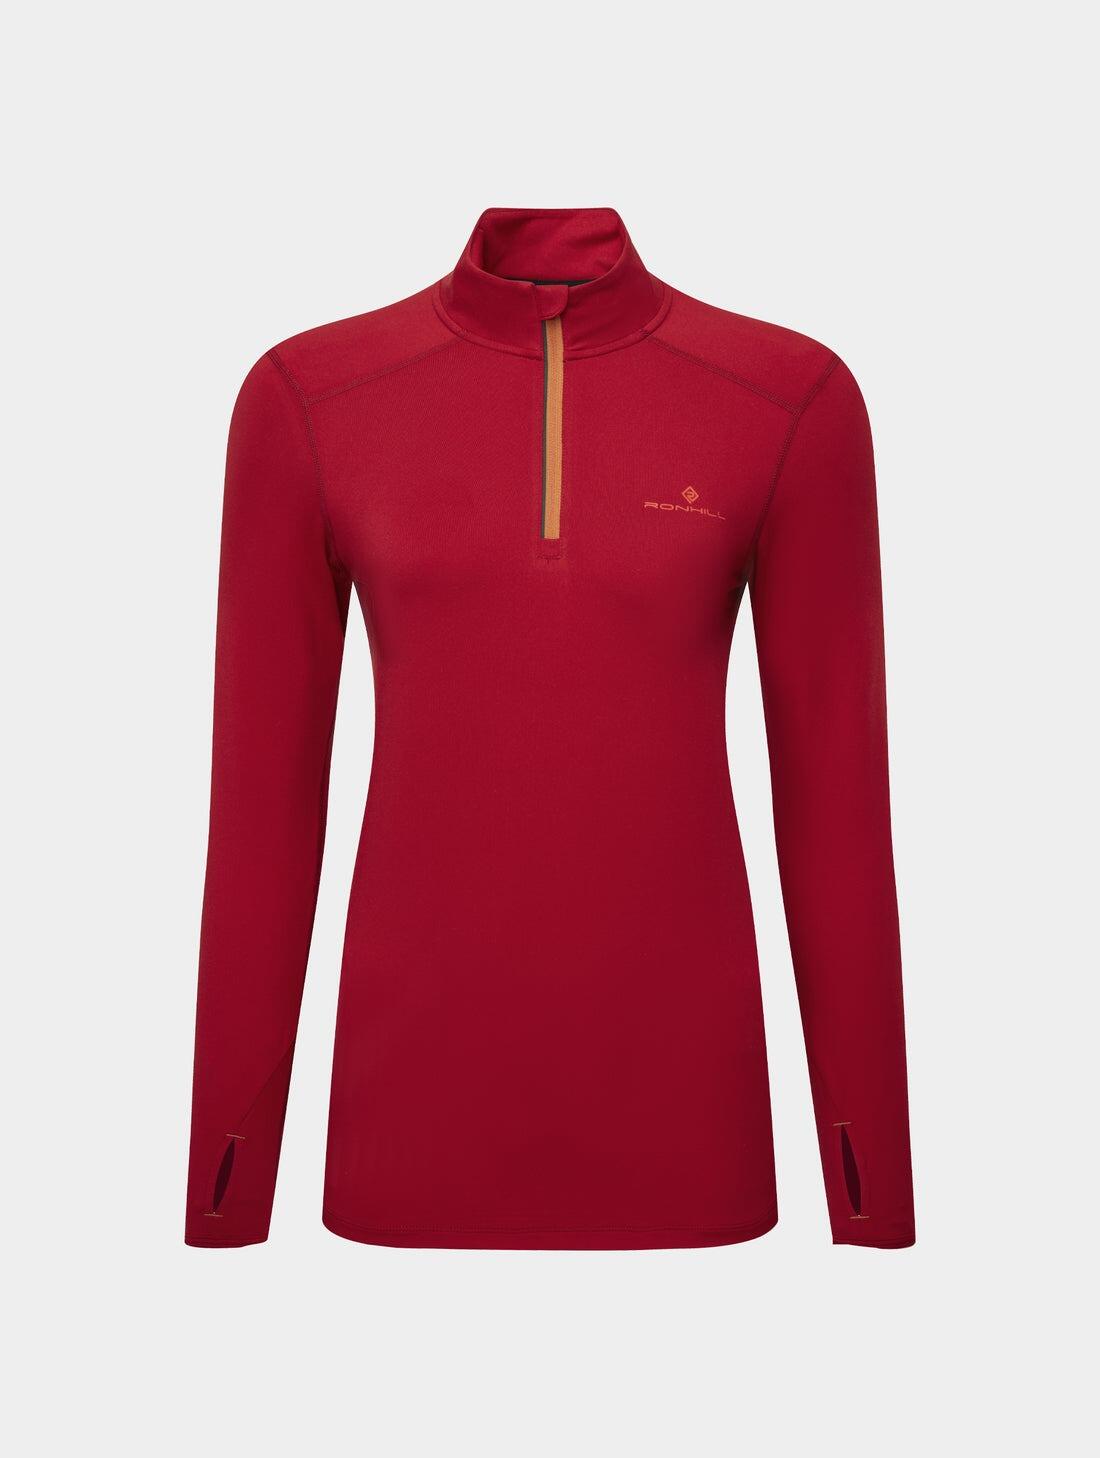 RONHILL Ronhill Women's Core Thermal 1/2 Zip Red